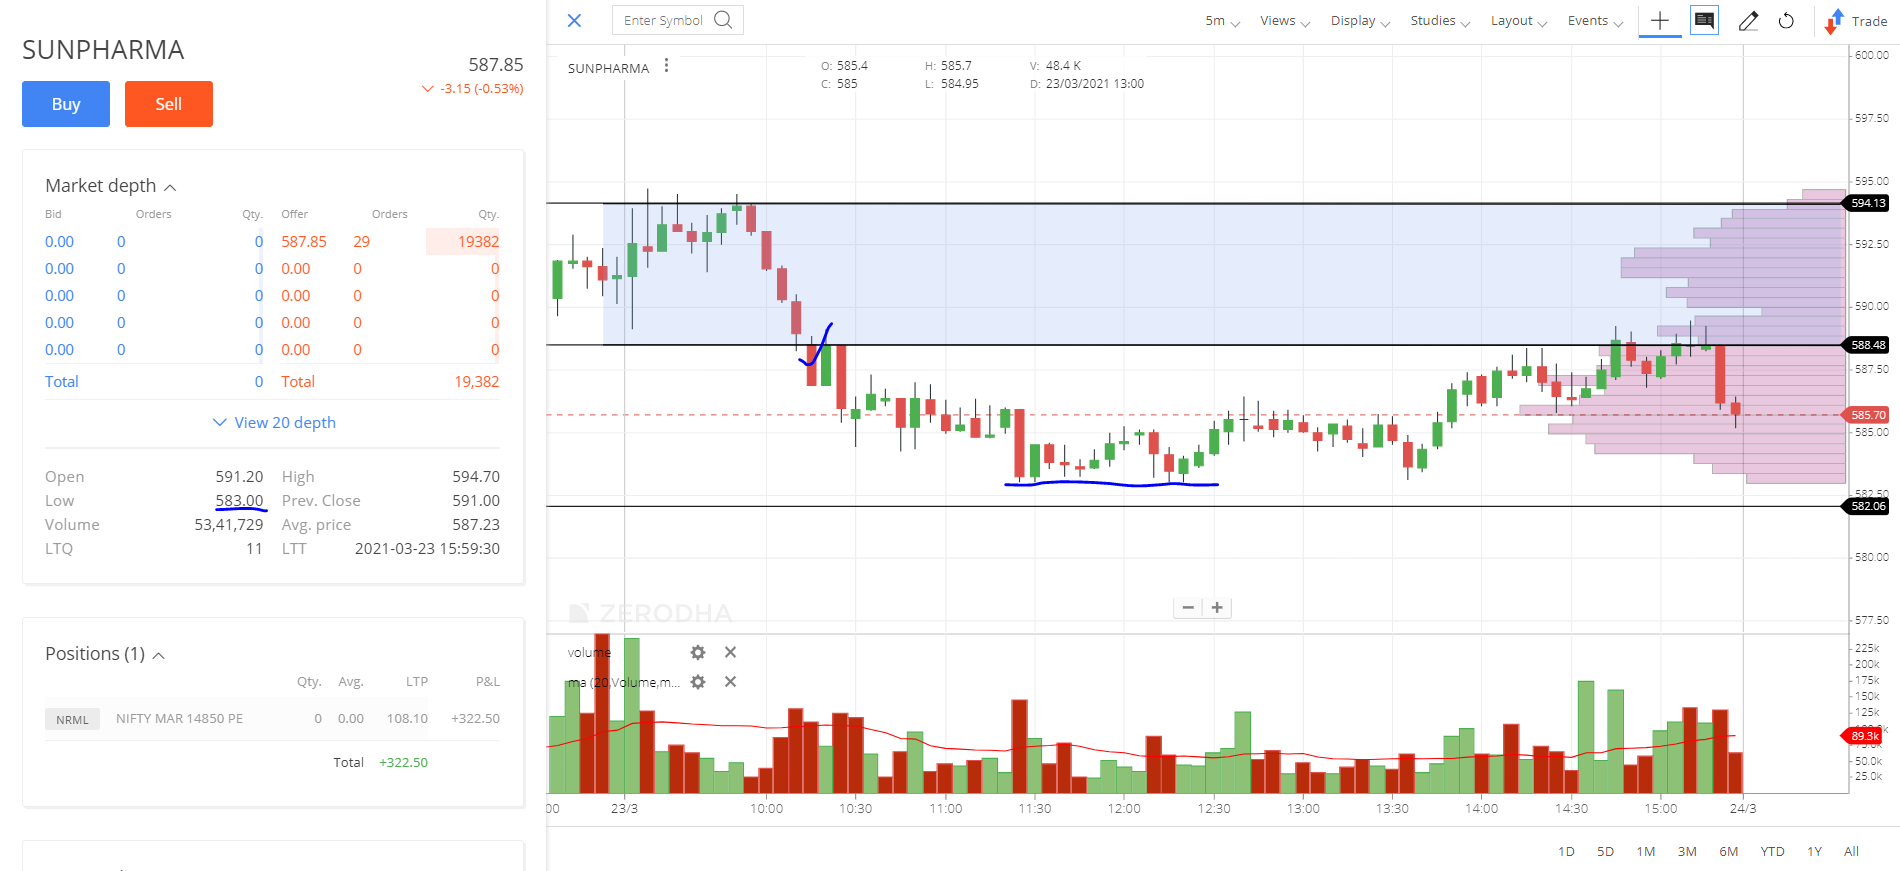 SUNPHARMA_Best performing stock for future 23 MARCH 2021 BY DHAVAL MALVANIA PERFORMANCE